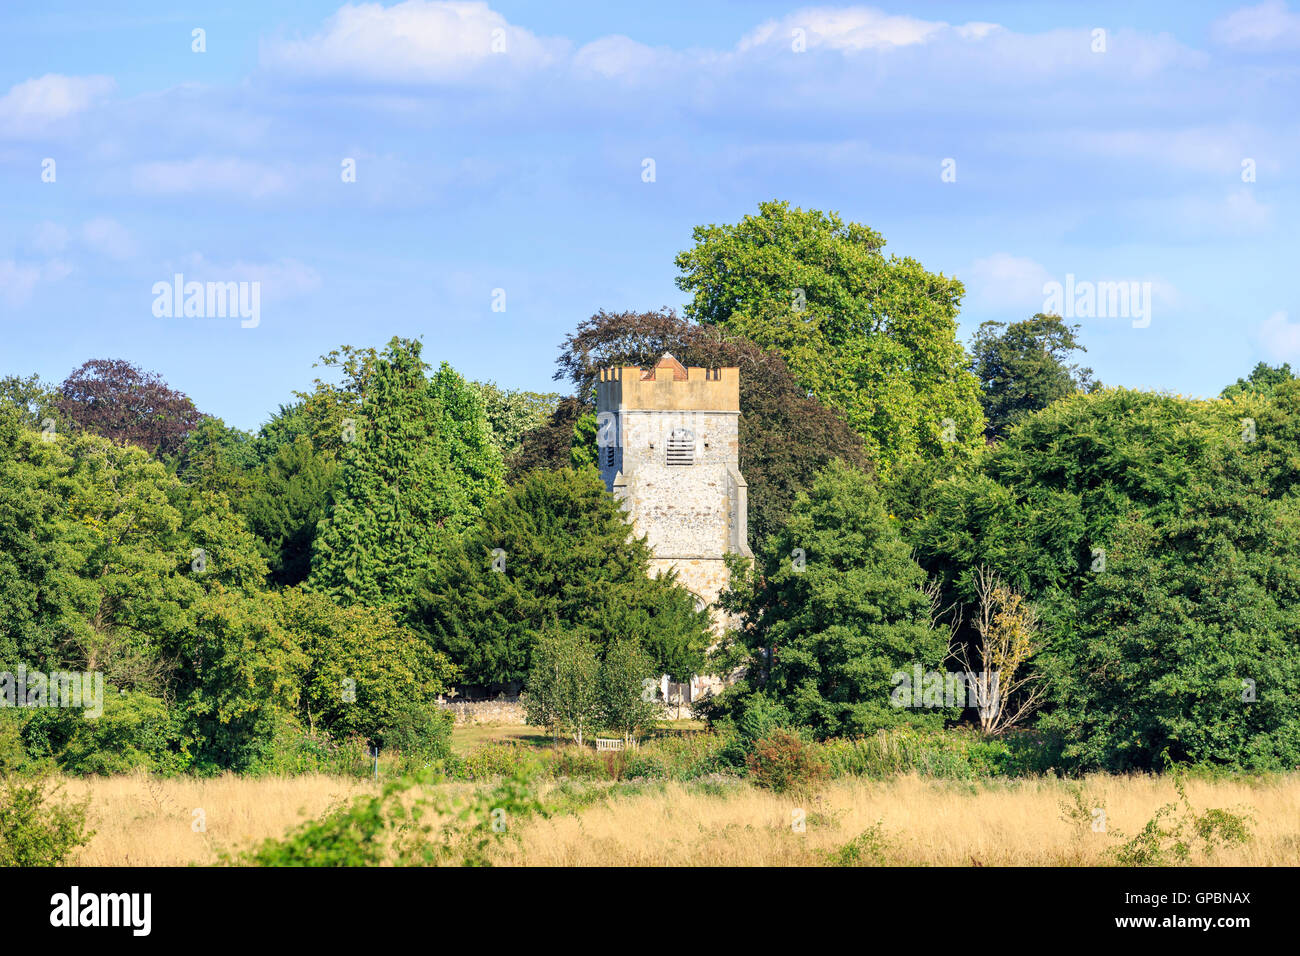 Church of St Mary the Virgin, Send, with typical square tower, in pretty leafy Surrey countryside in summer on a sunny day Stock Photo